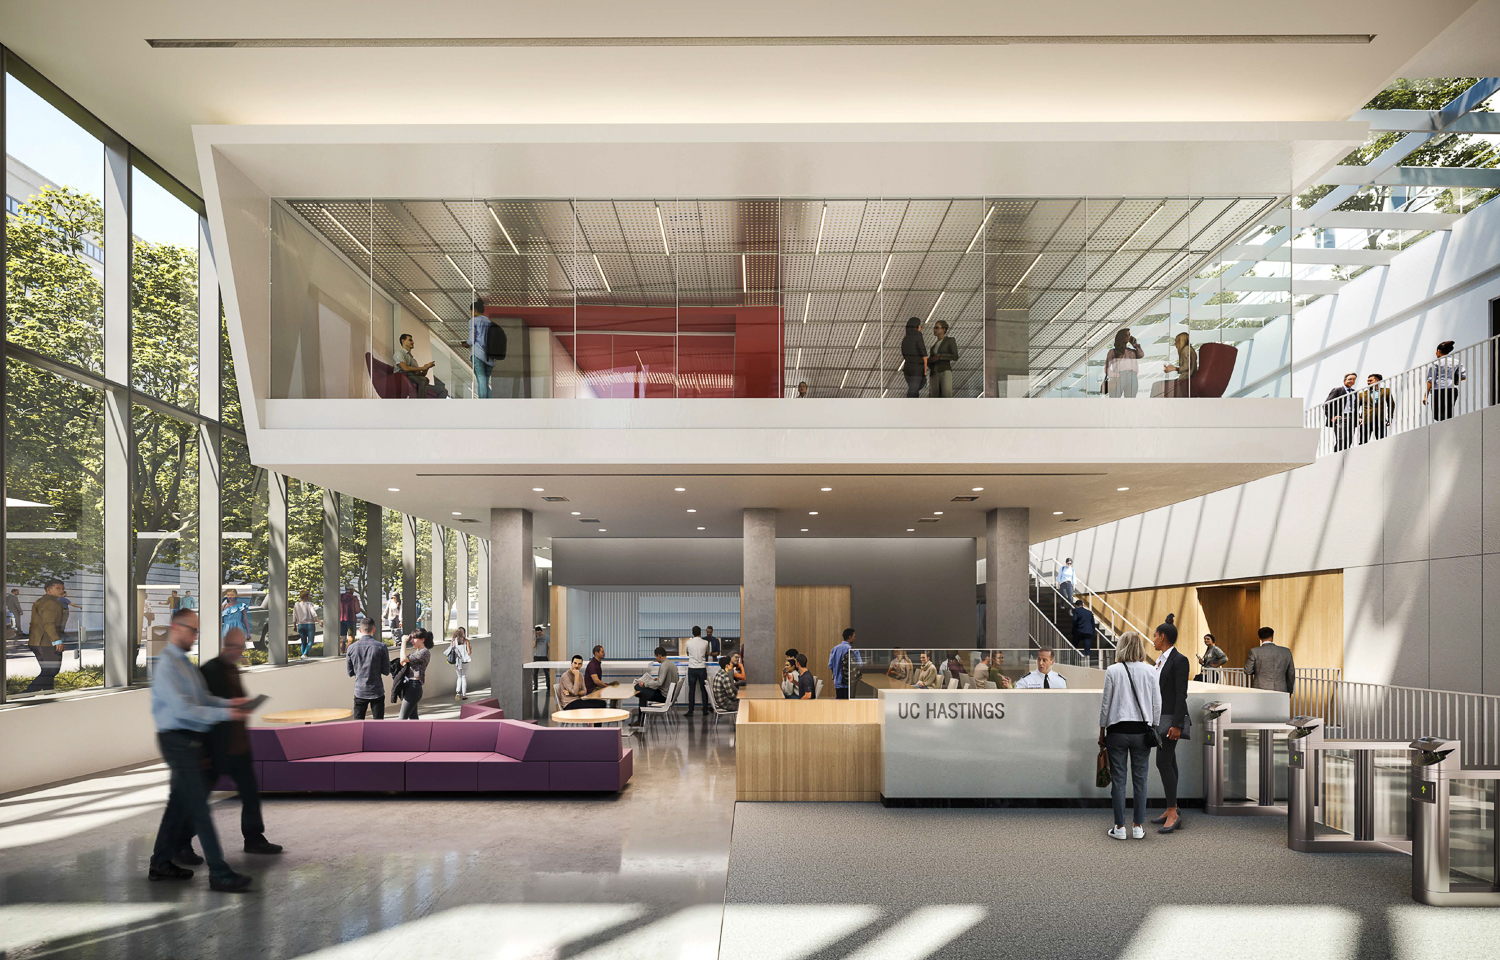 198 McAllister Street Academic Village lobby, rendering courtesy UC Hastings Law, architecture by Perkins&Will